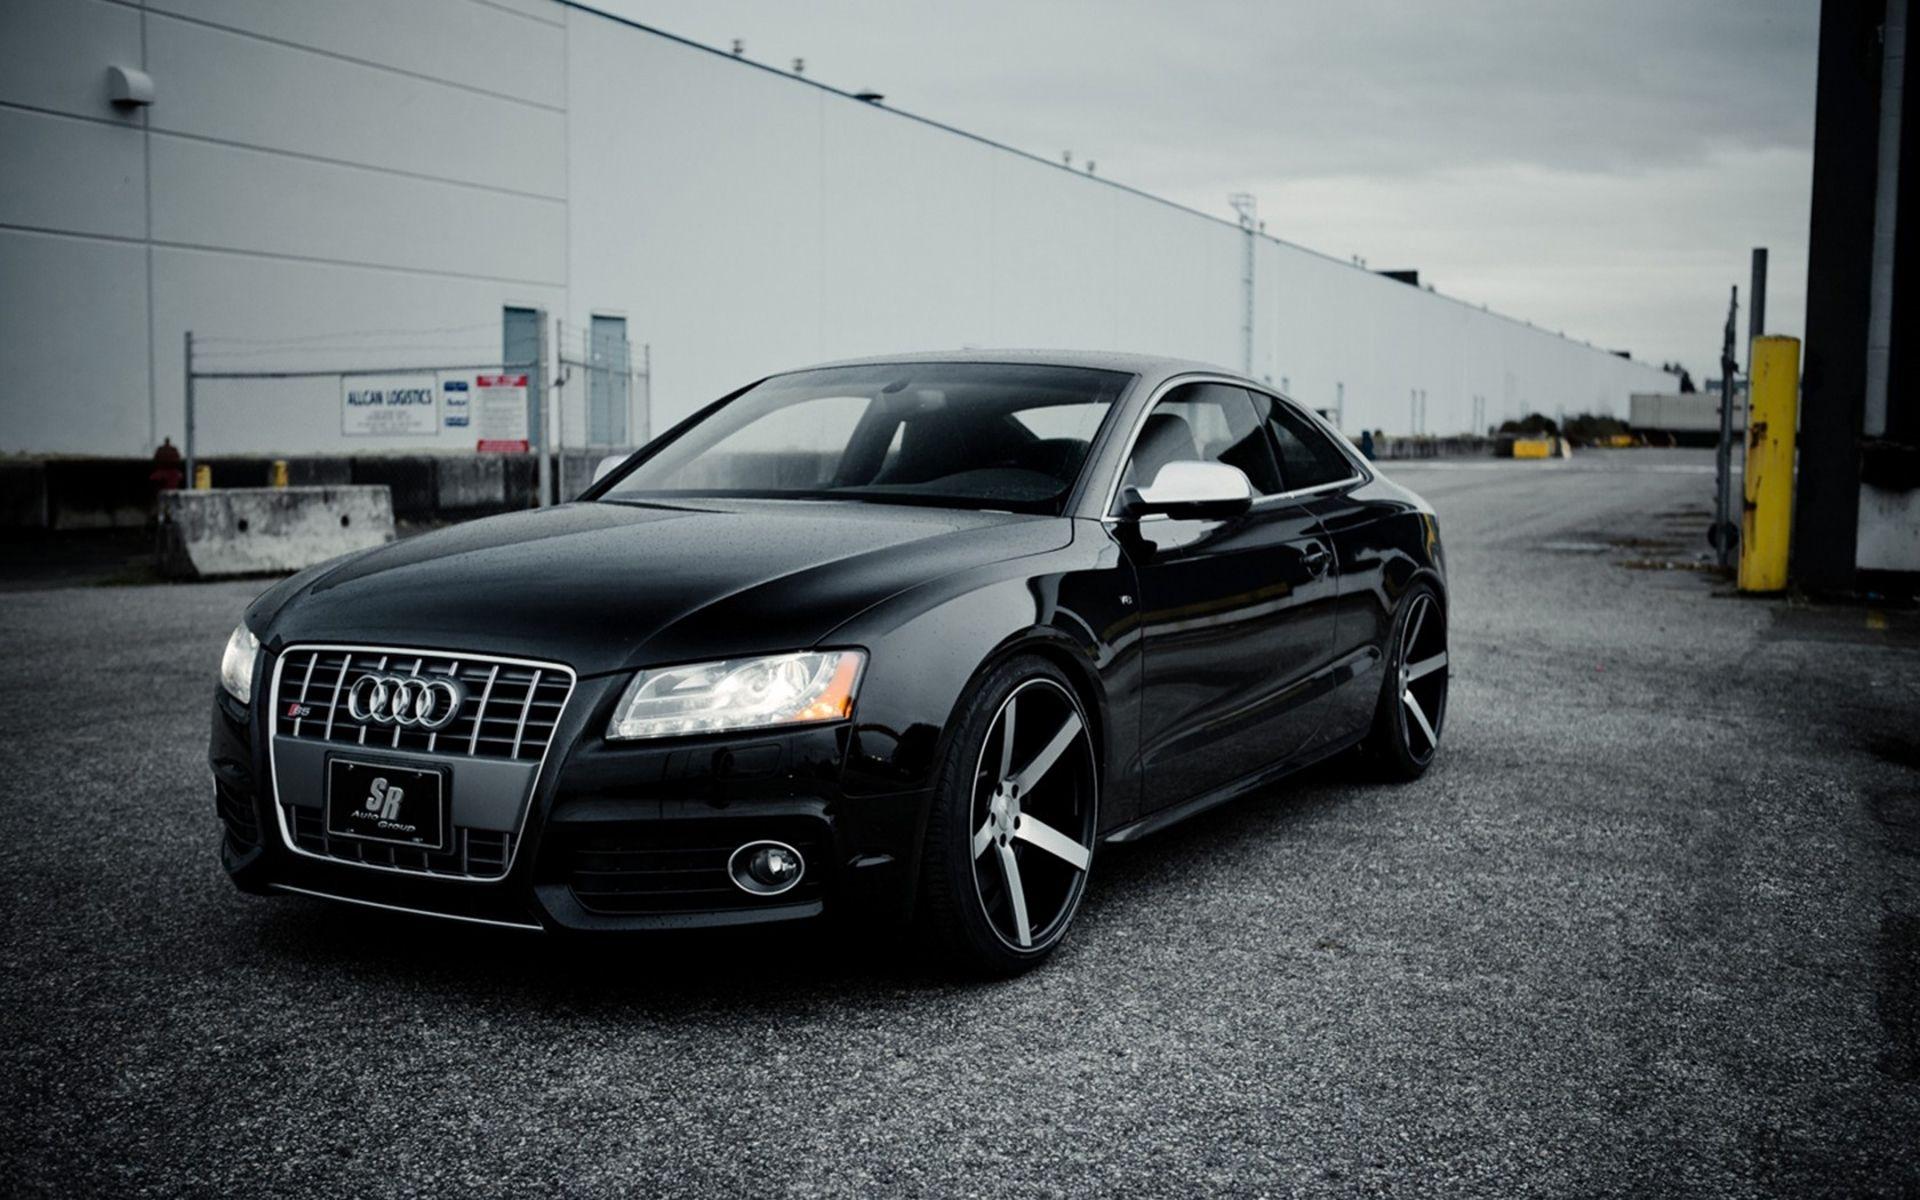 Free Audi Car Full HD Wallpaper Pics Llection Of On Androids